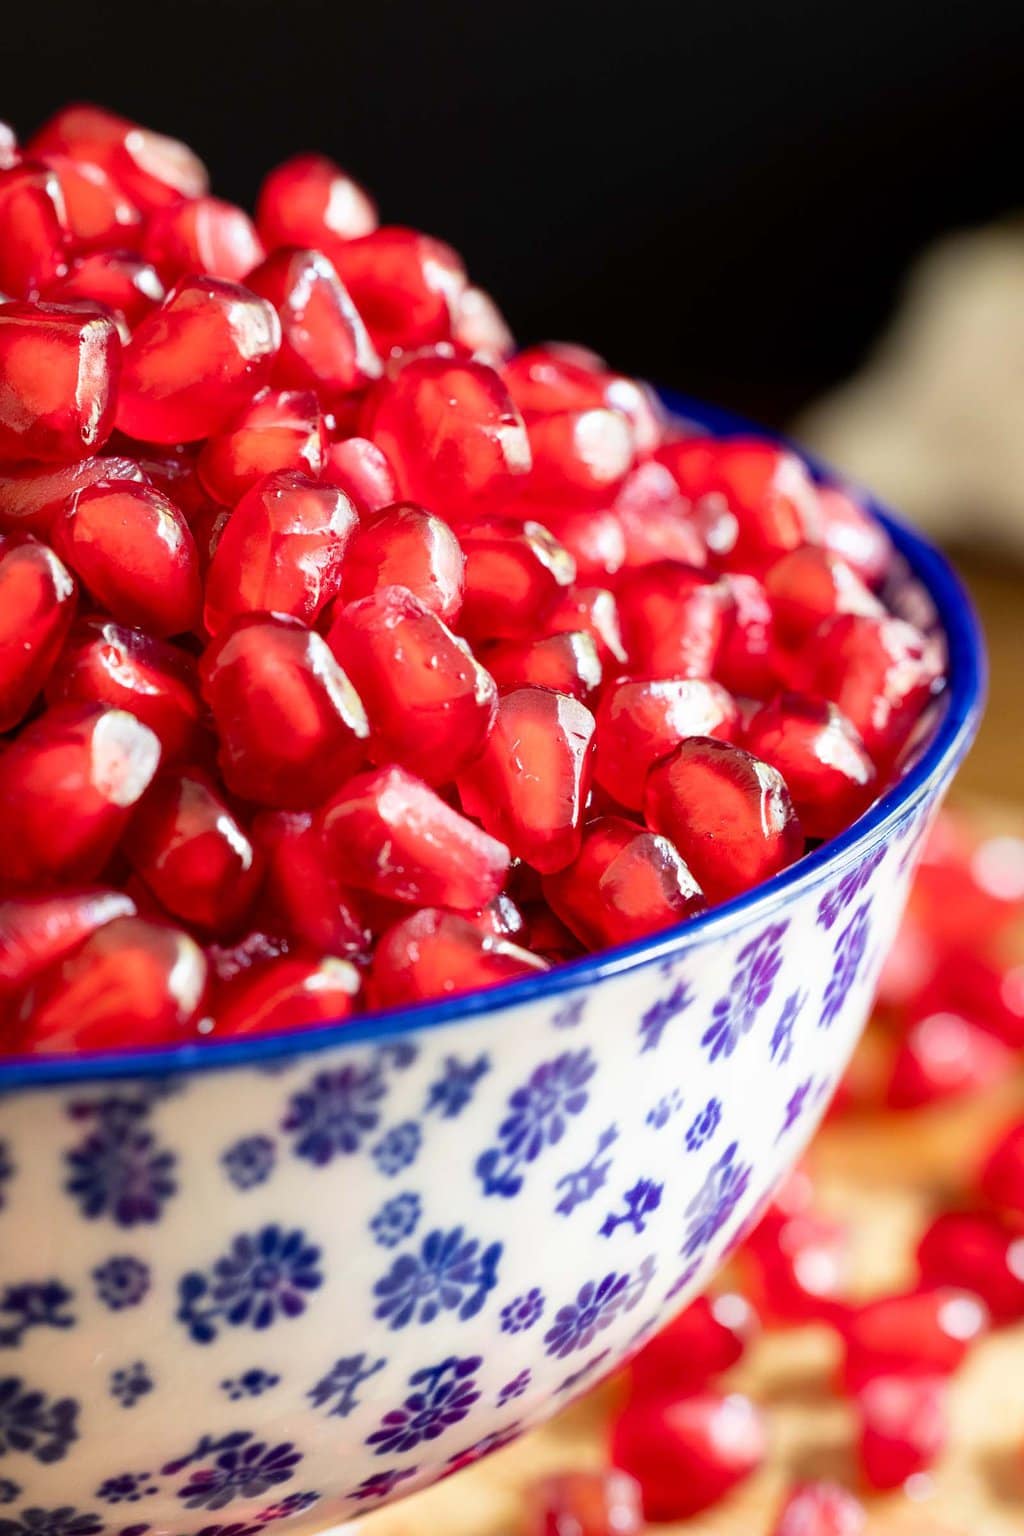 Vertical extreme closeup photo of a white and blue patterned bowl filled with pomegranate seeds.